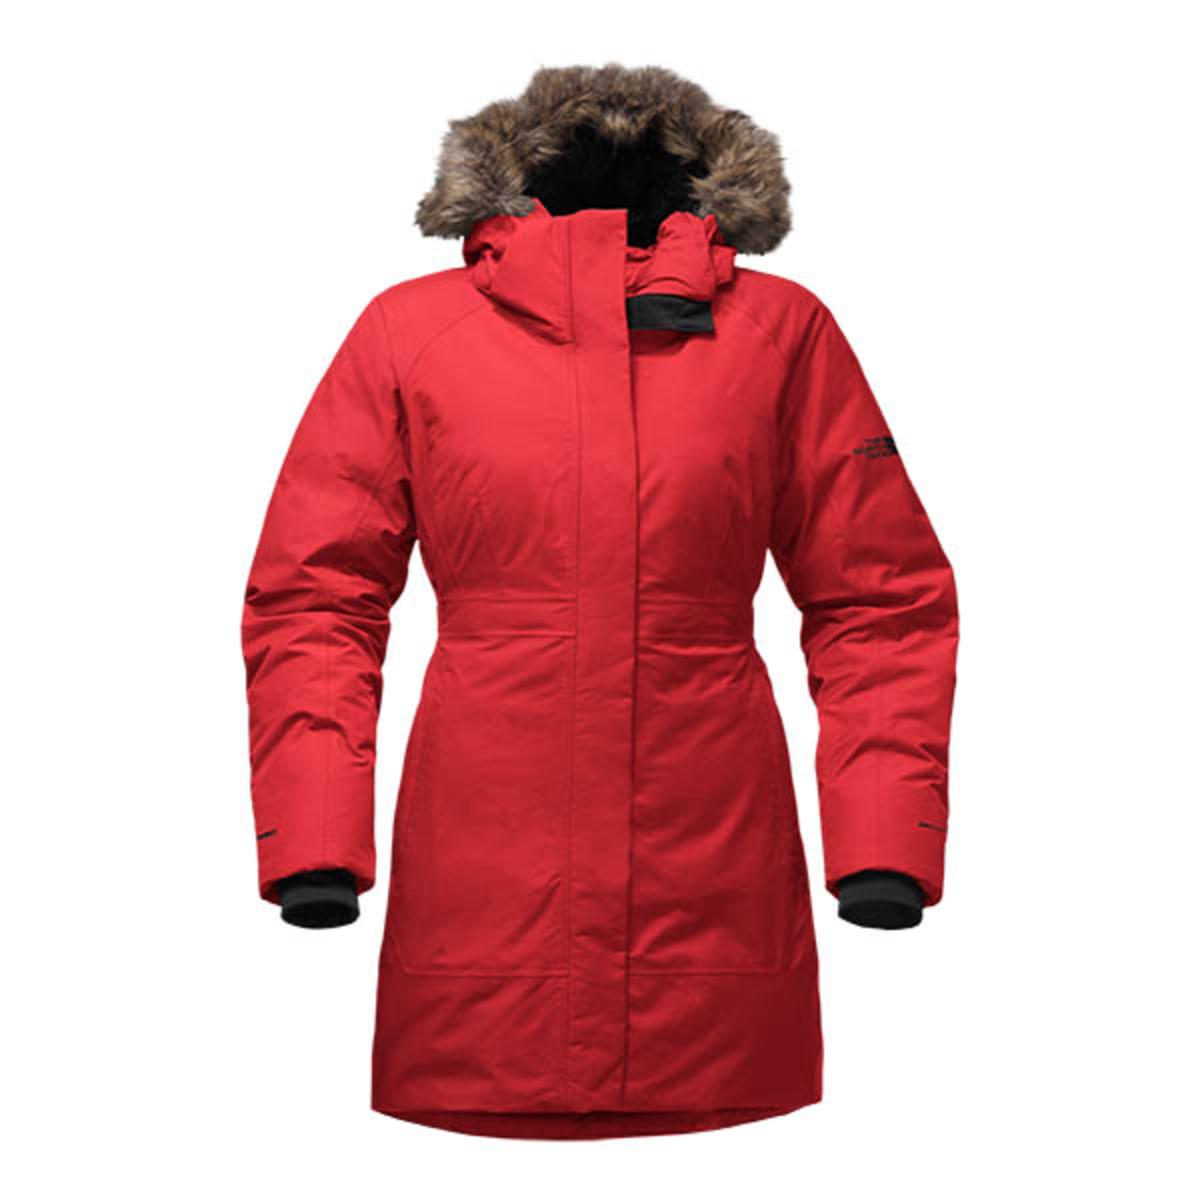 WOMEN'S APEX ELEVATION JACKET, The North Face